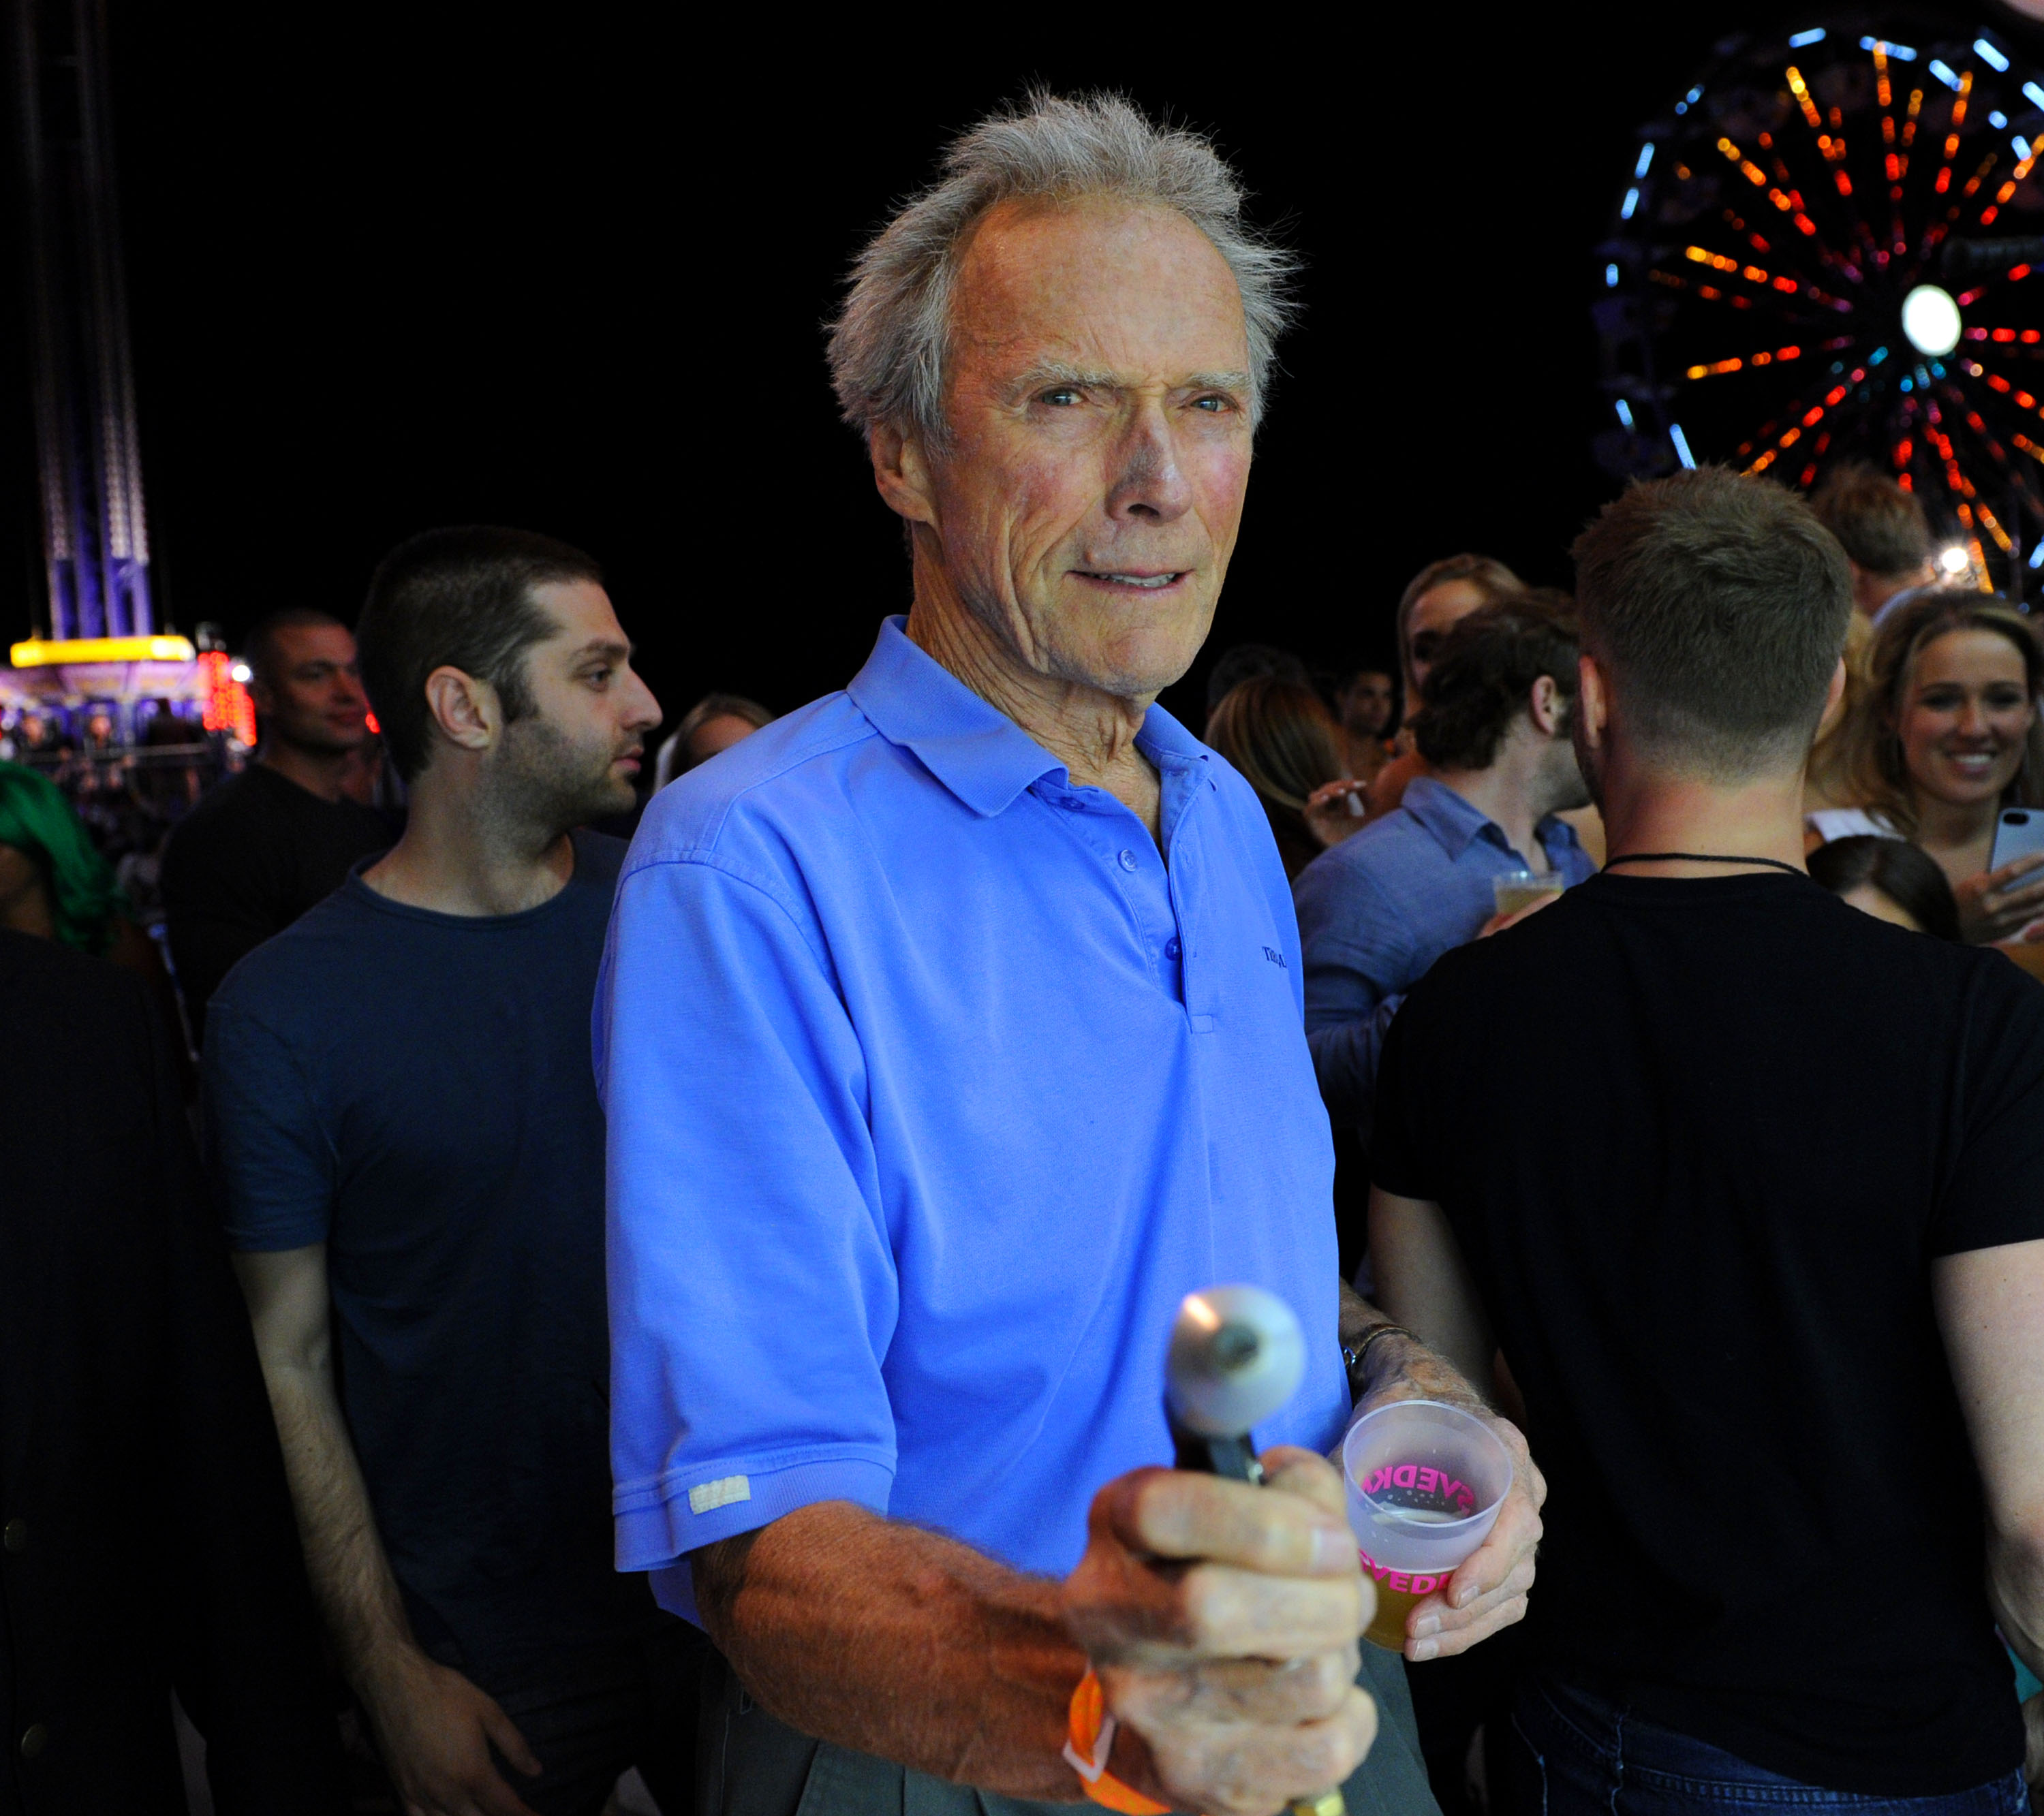 -Thermal, CA - 04/13/13 - A|X Armani Exchange Neon Carnival -PICTURED: Clint Eastwood -PHOTO by: Seth Browarnik/startraksphoto.com -DSC_3107 Startraks Photo New York, NY  For licensing please call 212-414-9464 or email sales@startraksphoto.com